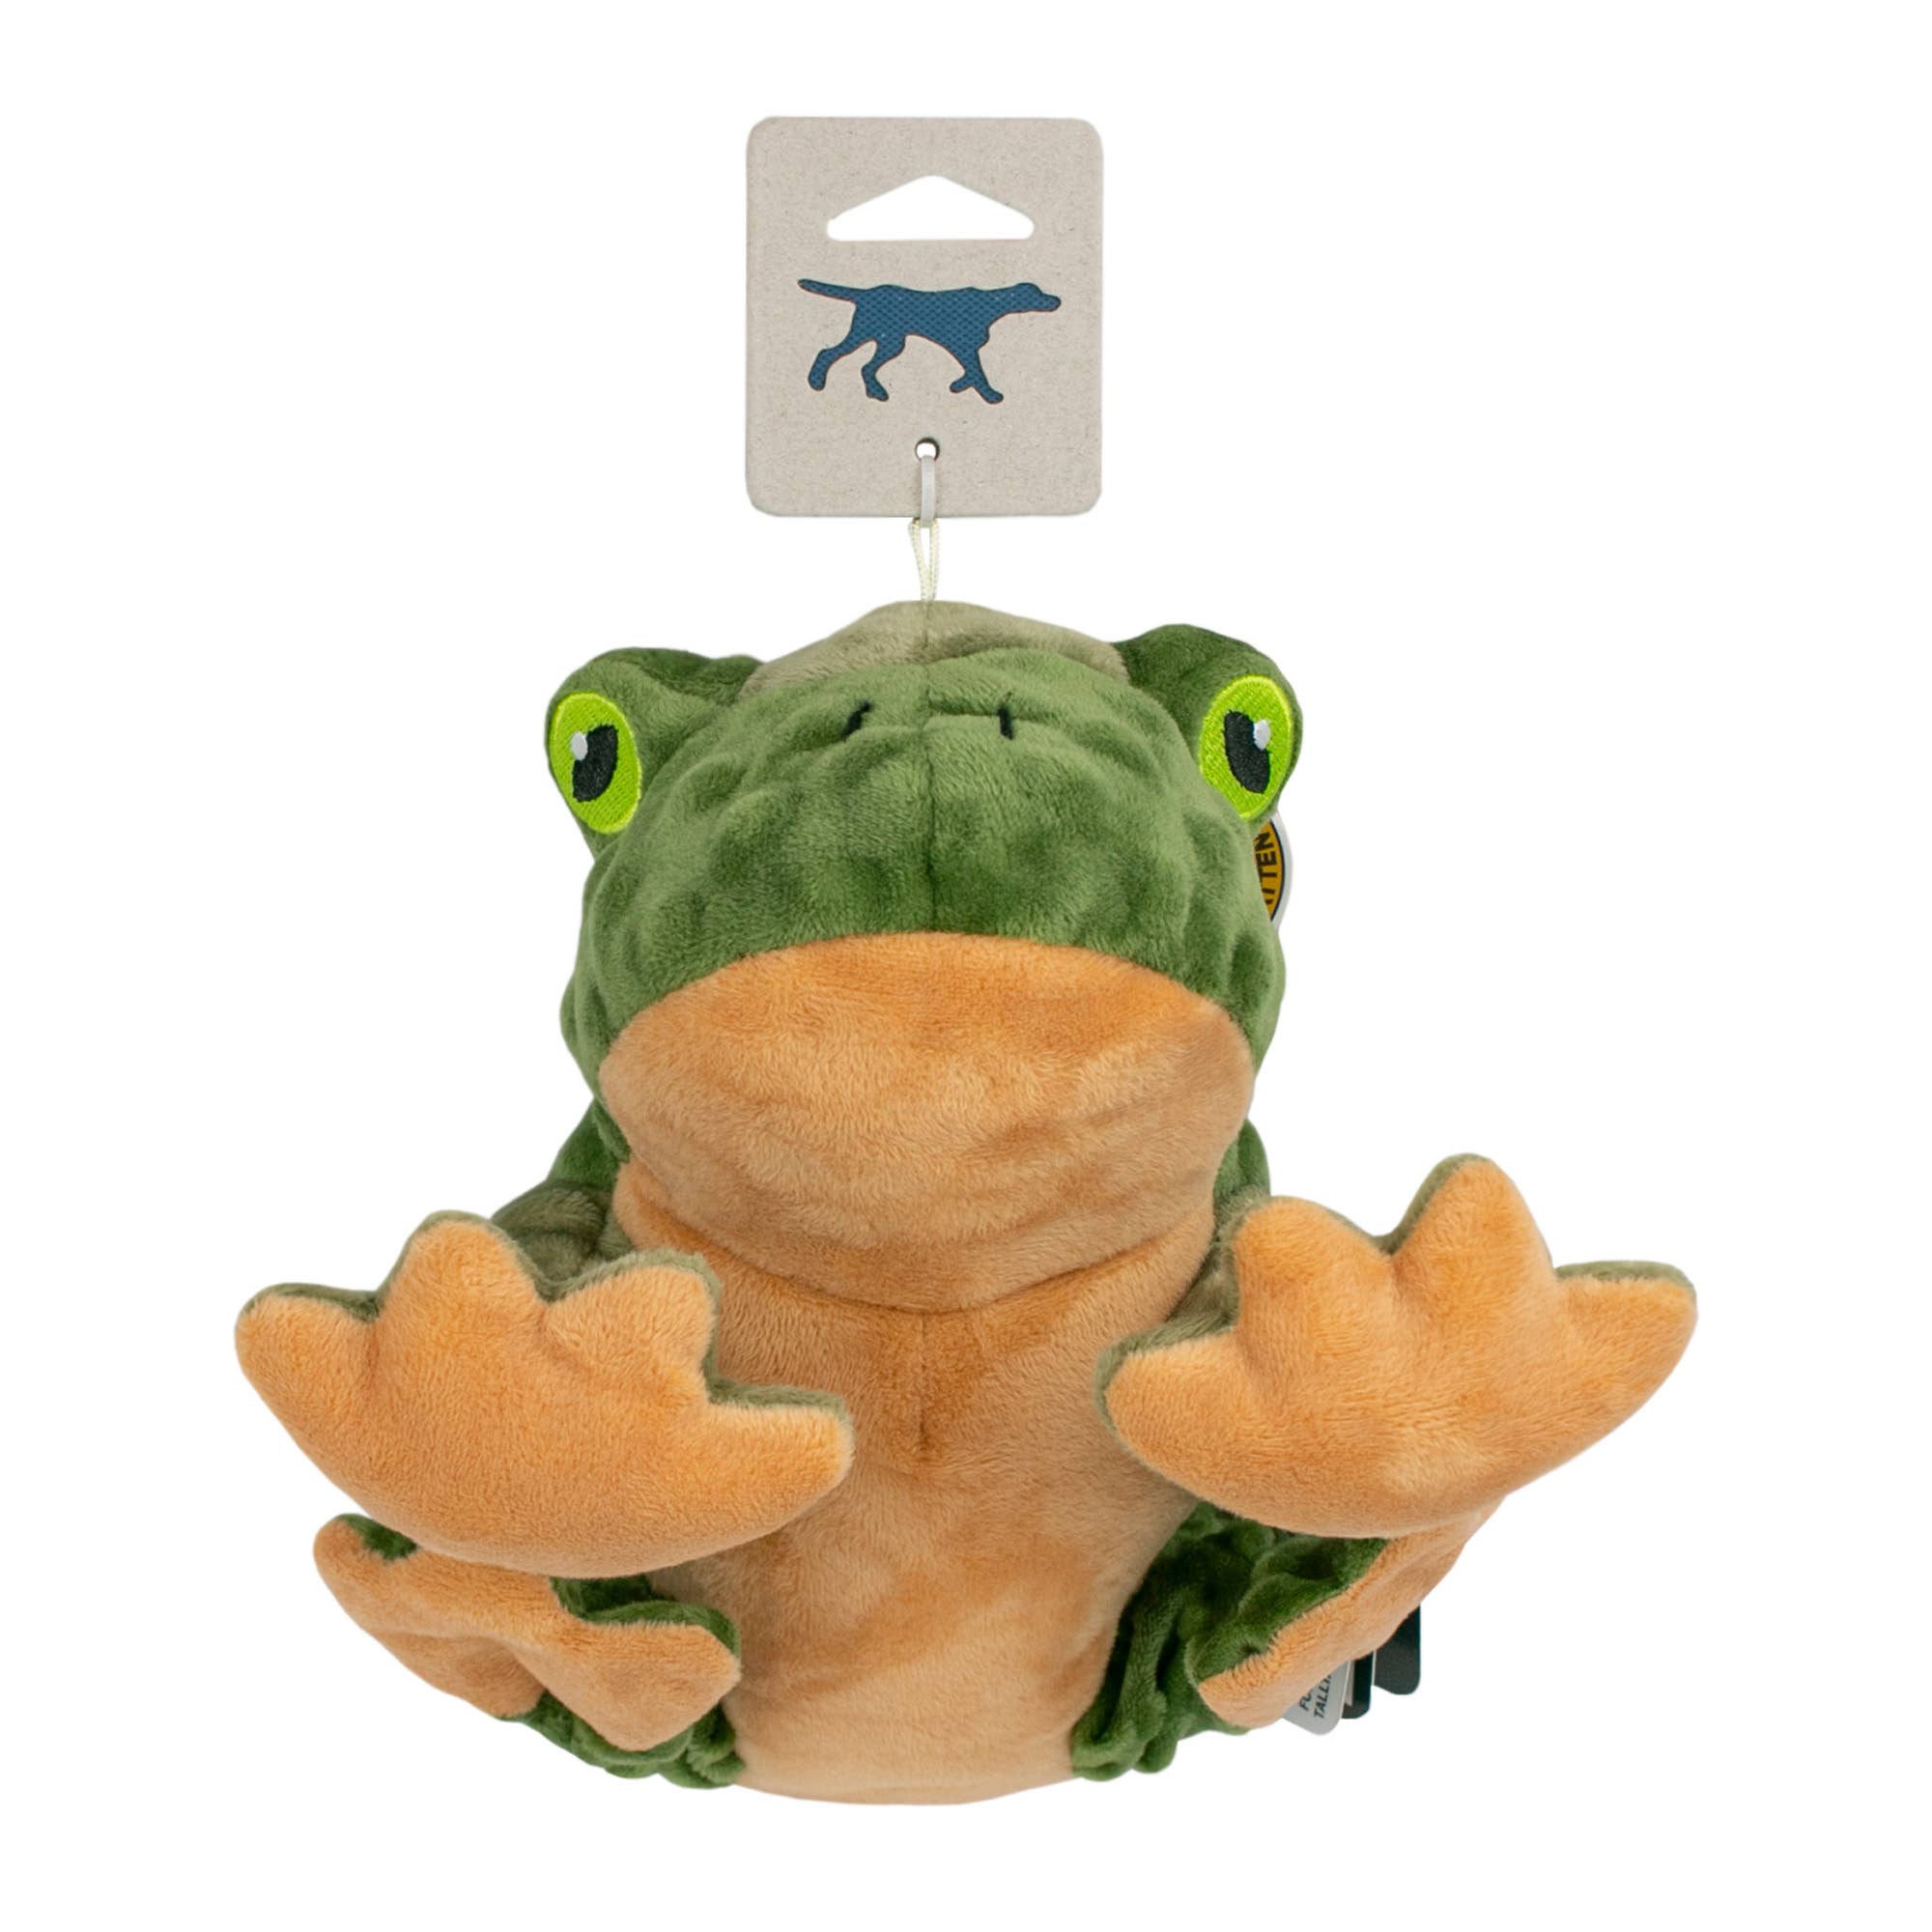 Tall Tails Animated Frog Toy